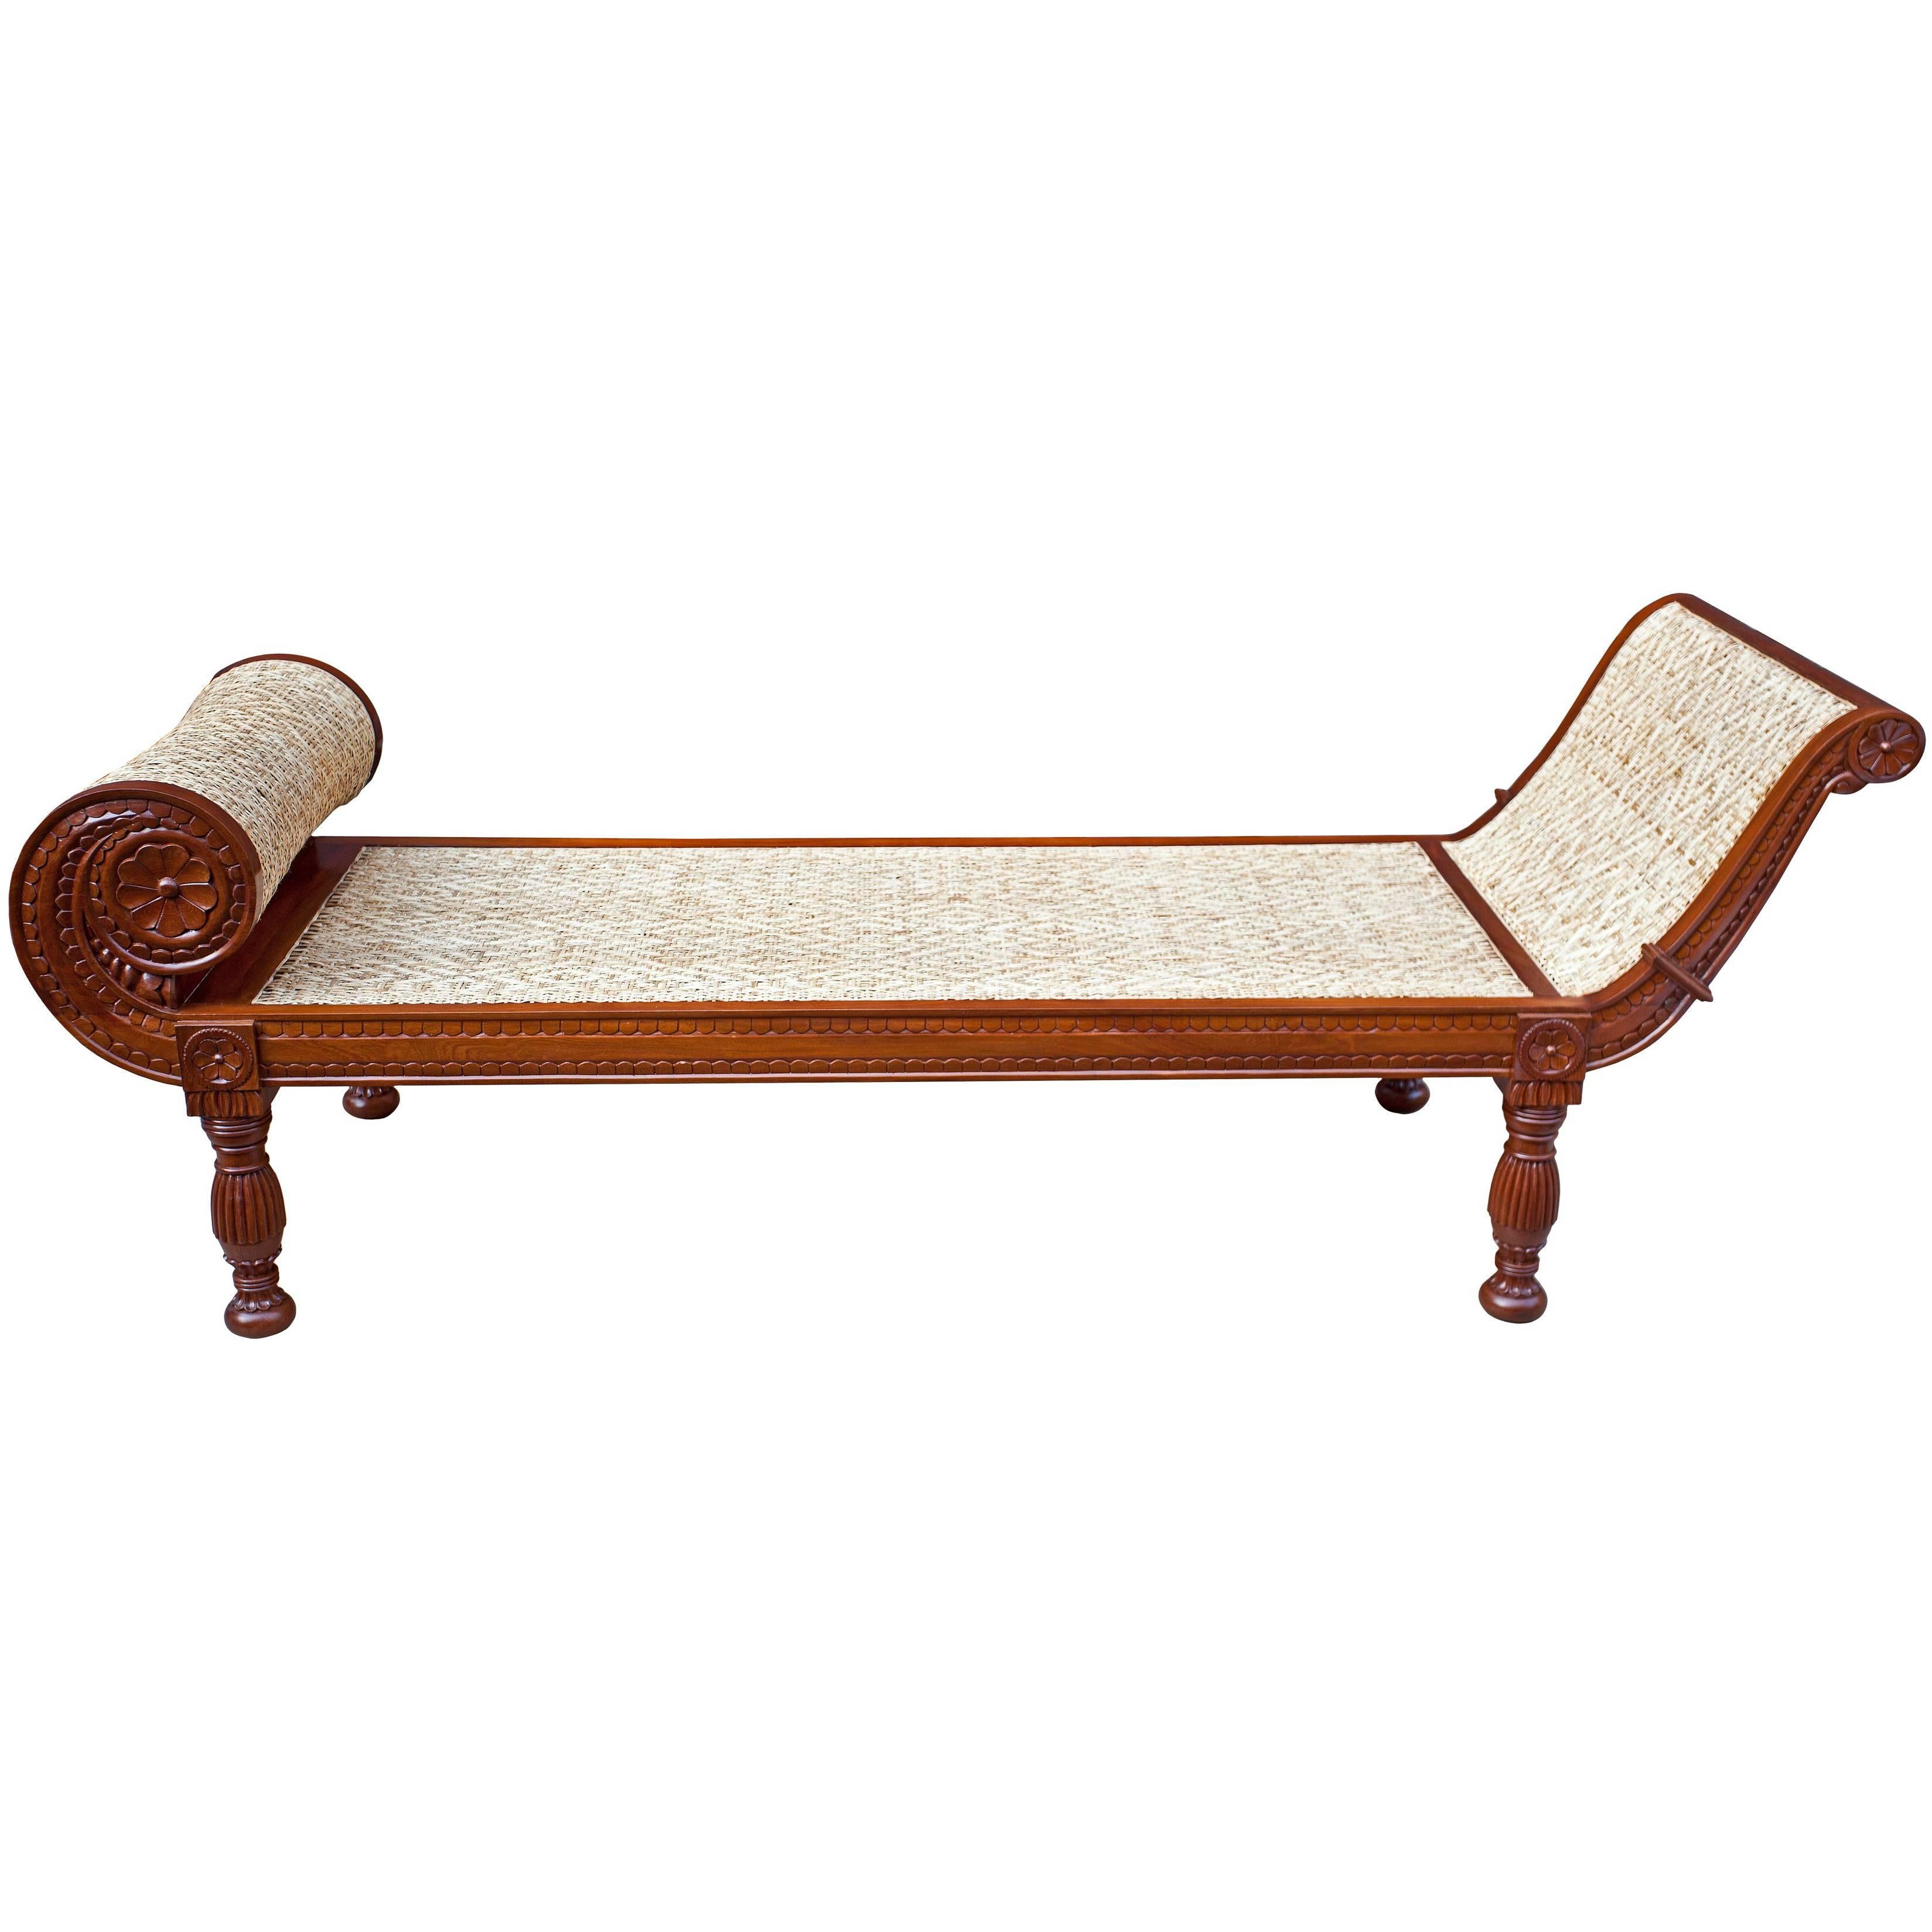 Colonial British Mahogany and Caned Daybed with Fine Carving